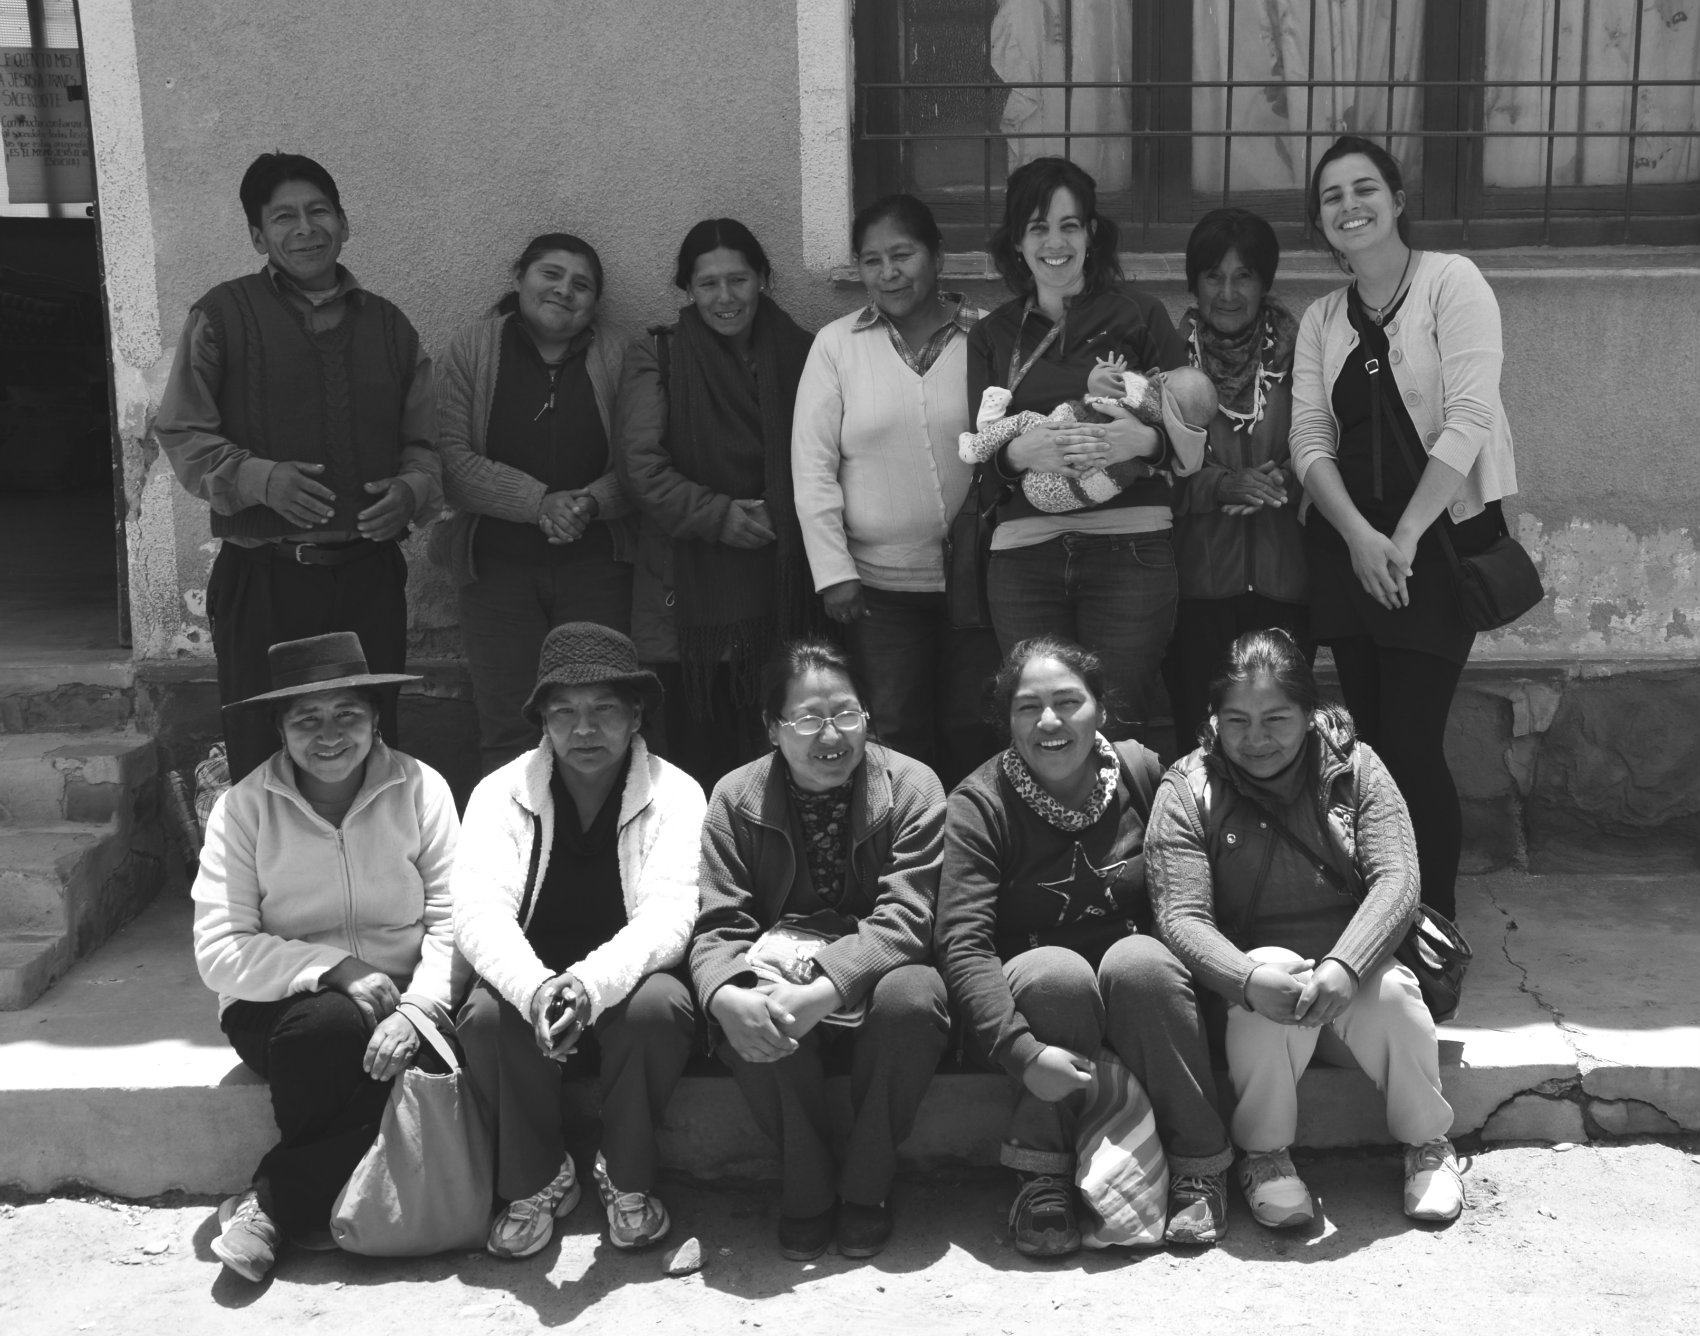 Sandra and Silvana Rossi with the artisans of the OBRA collective in Formosa, Argentina. Photo Source: OBRA Hecho a Mano